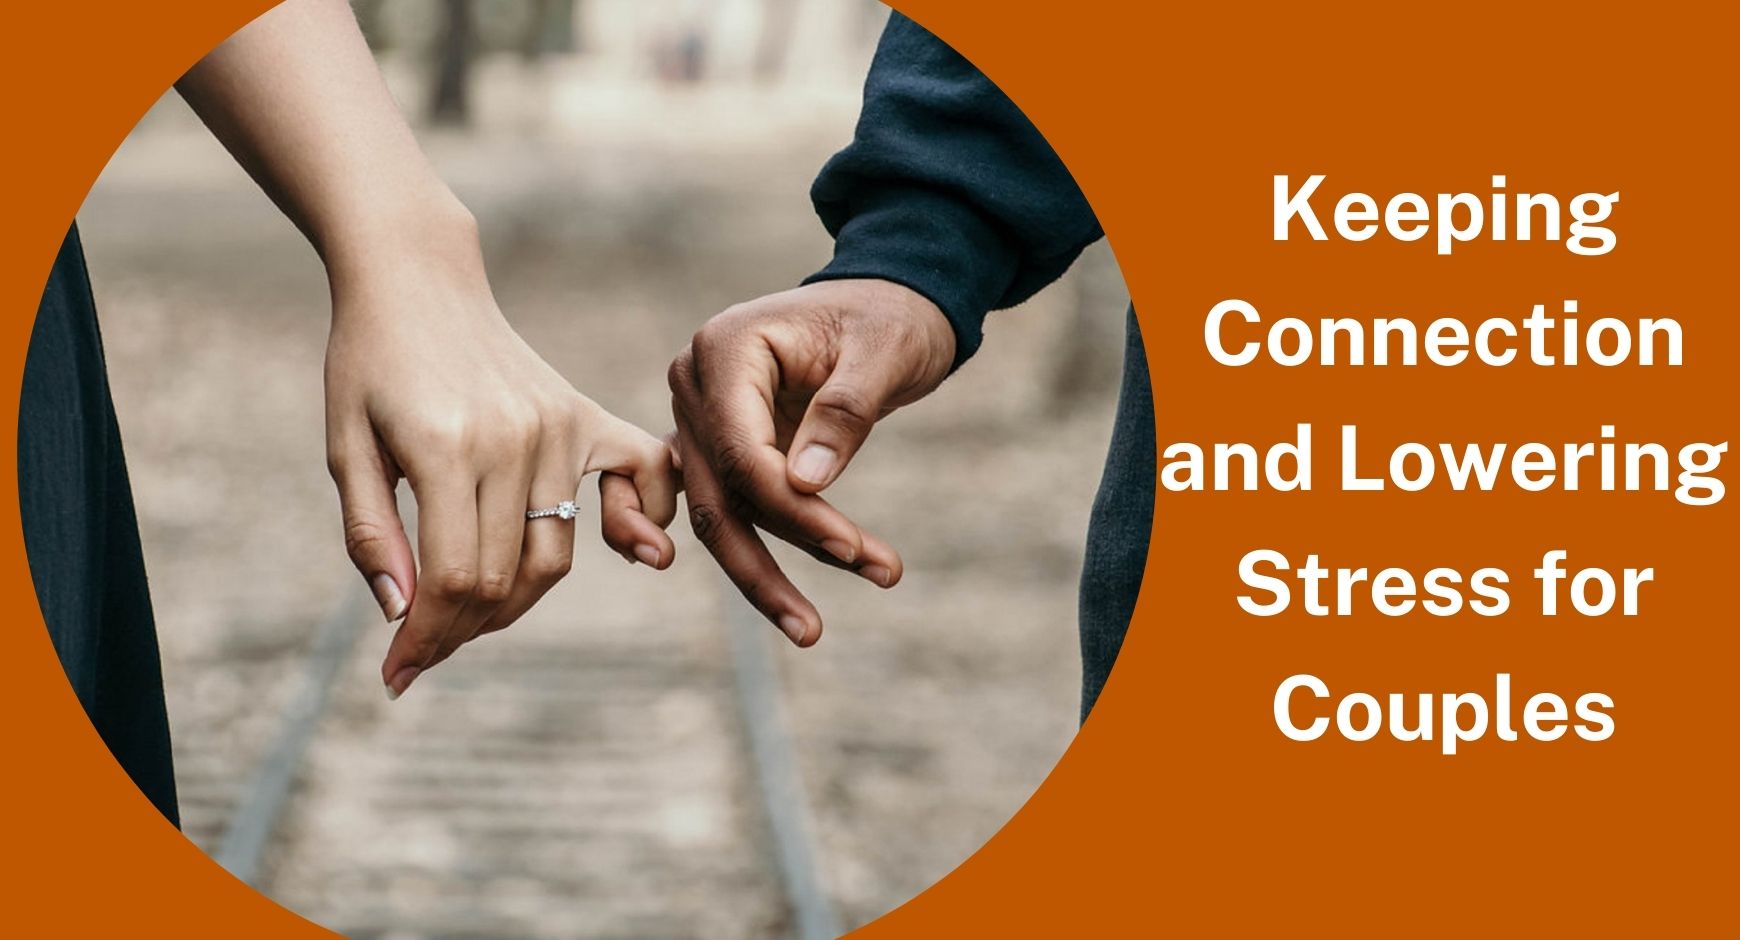 Two hands joined at the pinky fingers next to words that read "Keeping Connection and Lowering Stress for Couples"